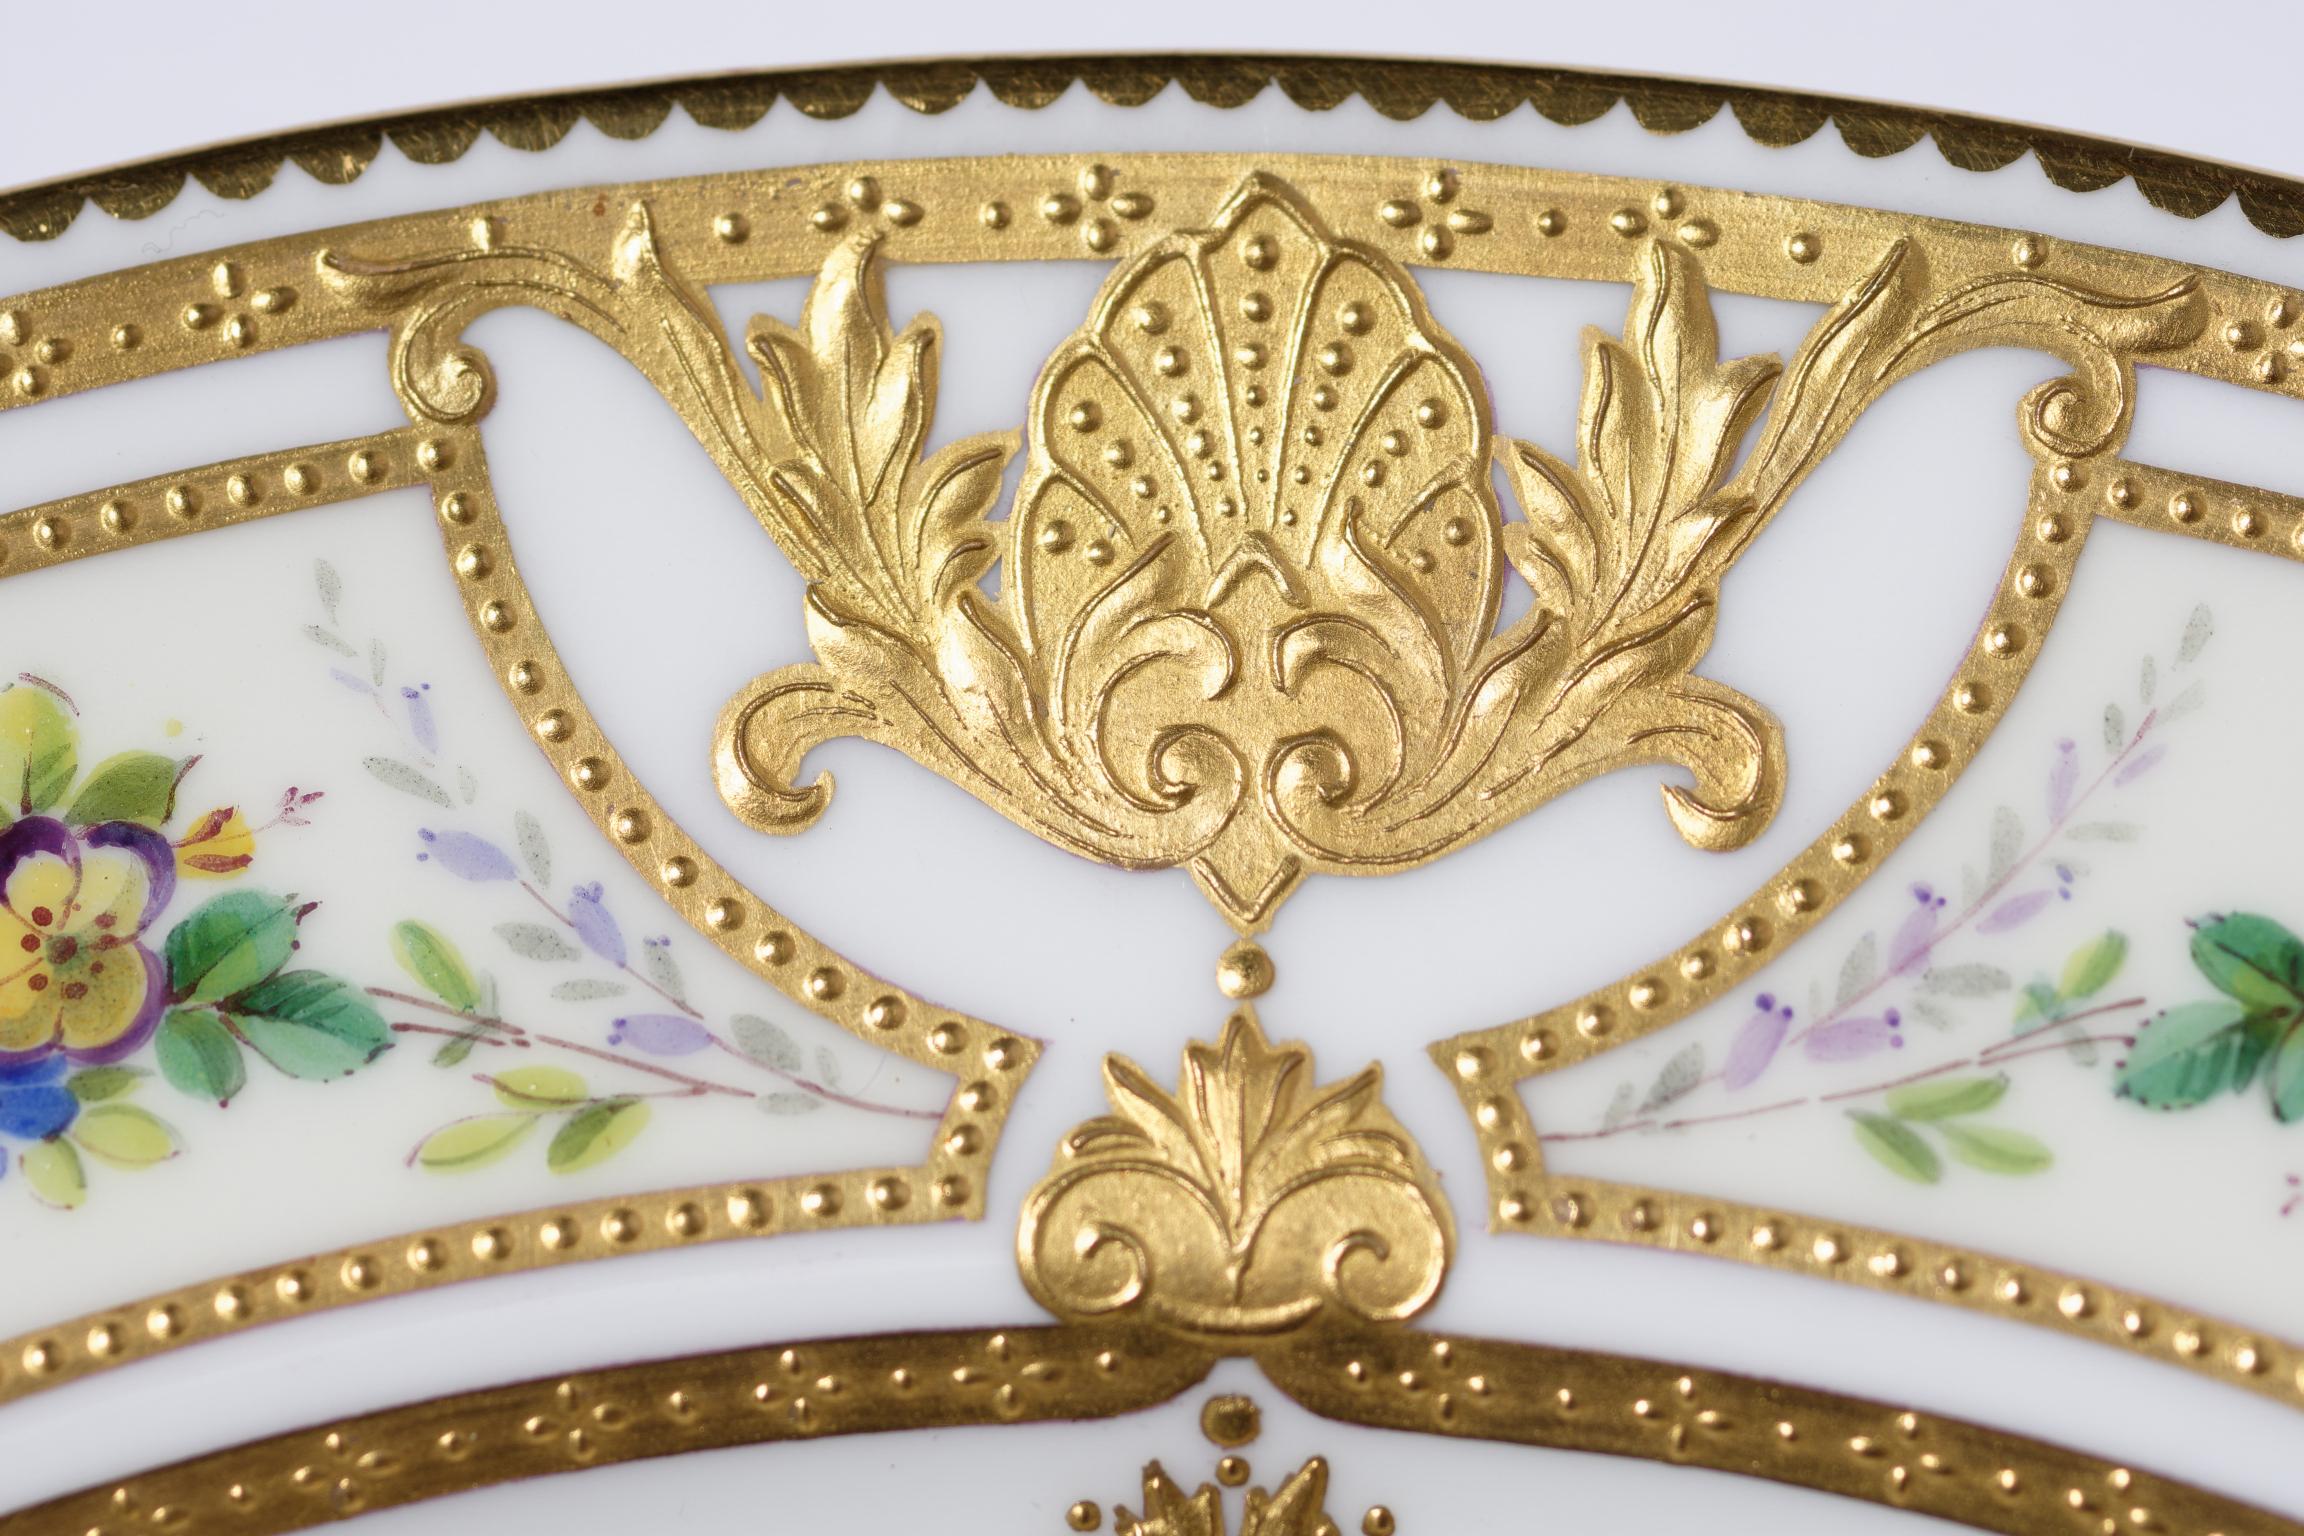 From one of the most admired Gilded Age factories, Minton England we have a set of 12 custom ordered dinner plates with exquisite raised tooled gilding. The collars feature fan flower and shell cartouches with all over triple gilt bead details. Hand